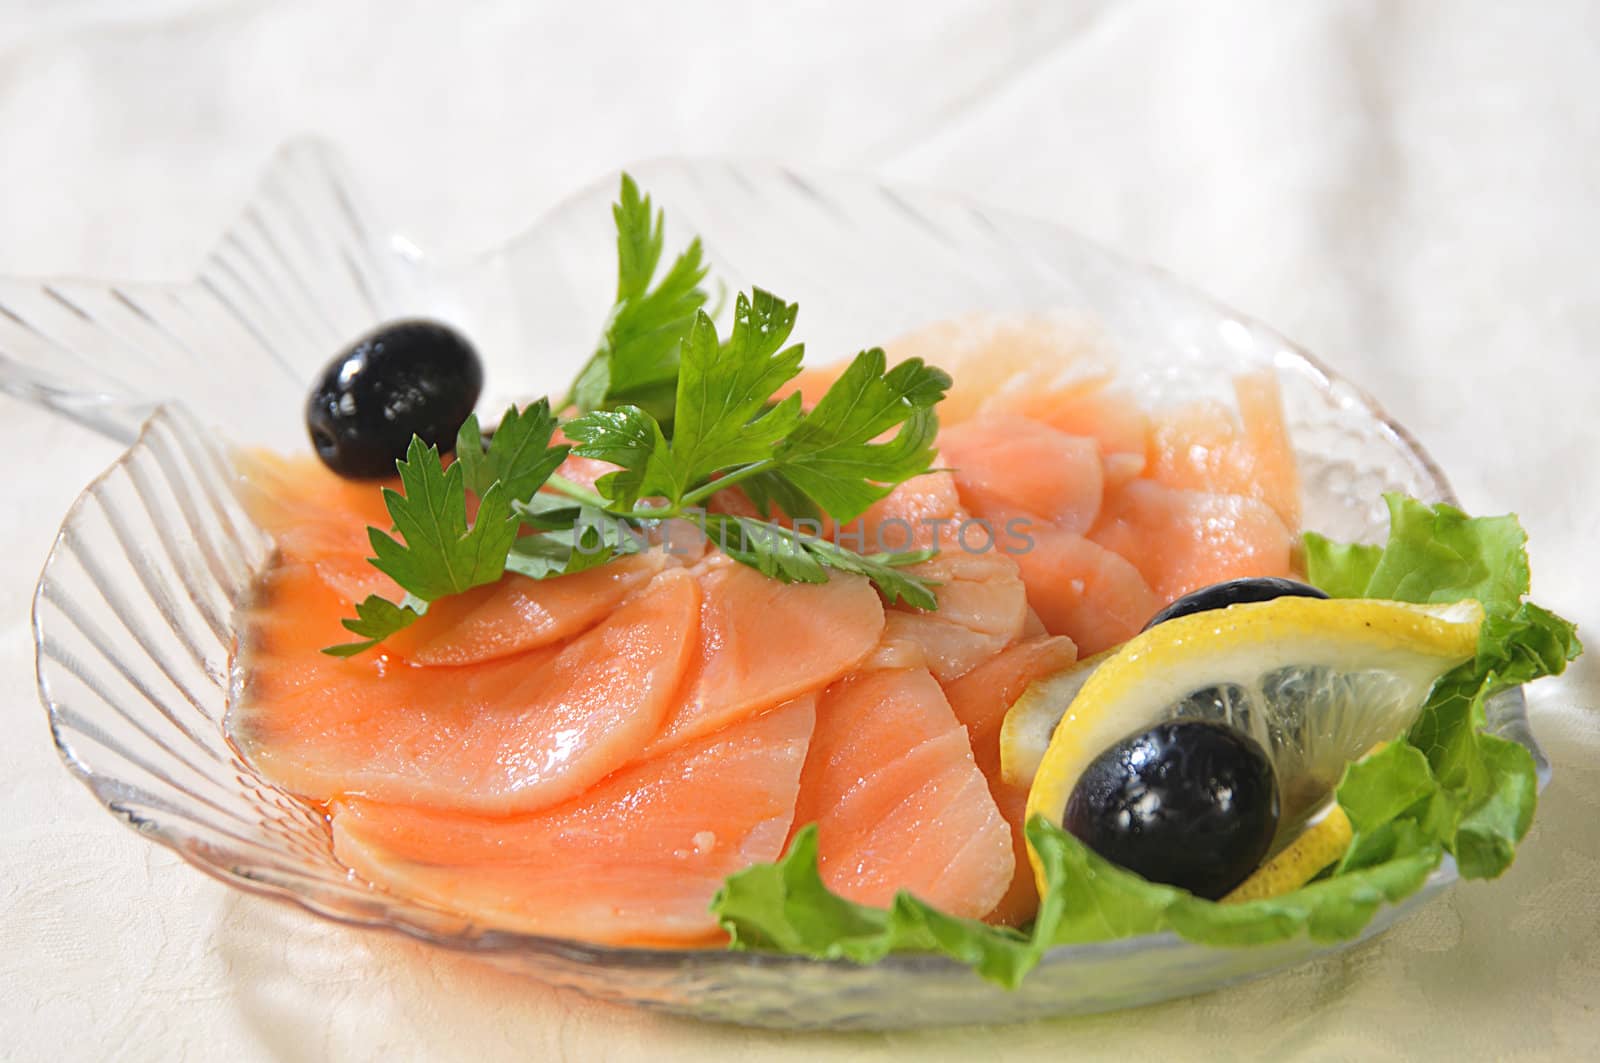 slices are filets of red fish, decorated a lemon, greenery and black olives